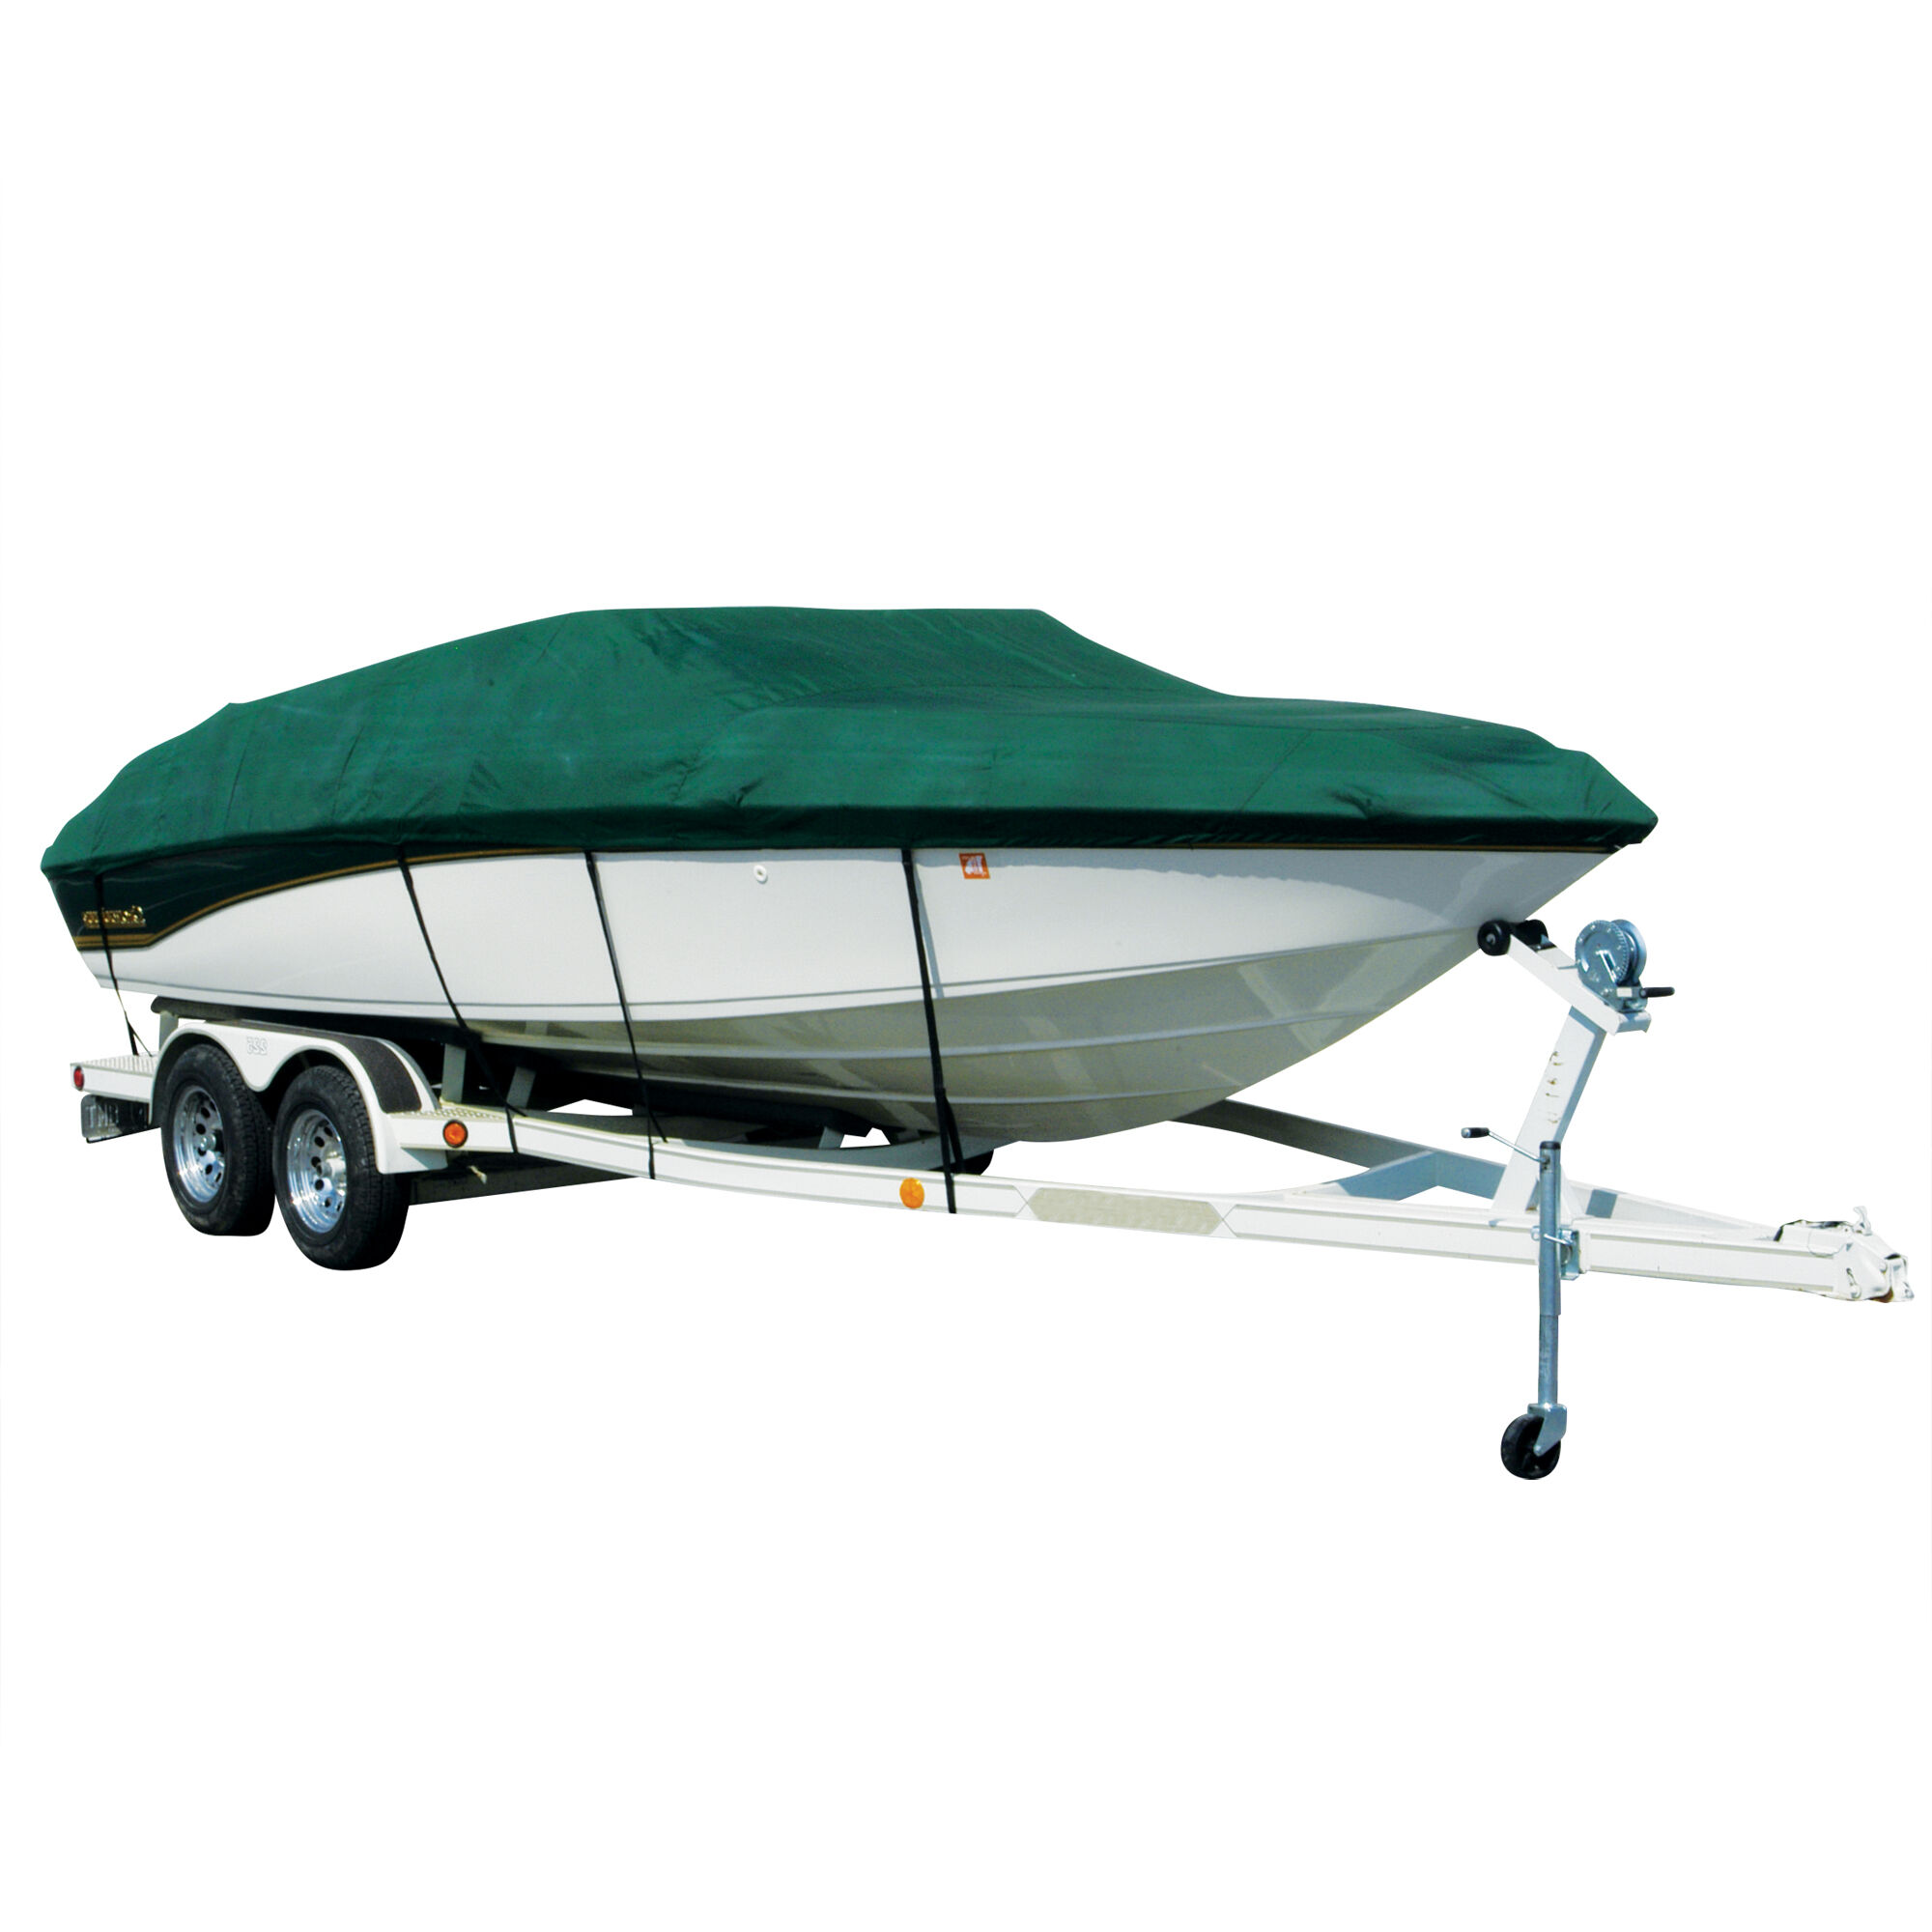 Covermate Sharkskin Plus Exact-Fit Cover for Campion Chase 910 Zri Chase 910 Zri Cc I/O. Forest Green Boat Cover Polyester